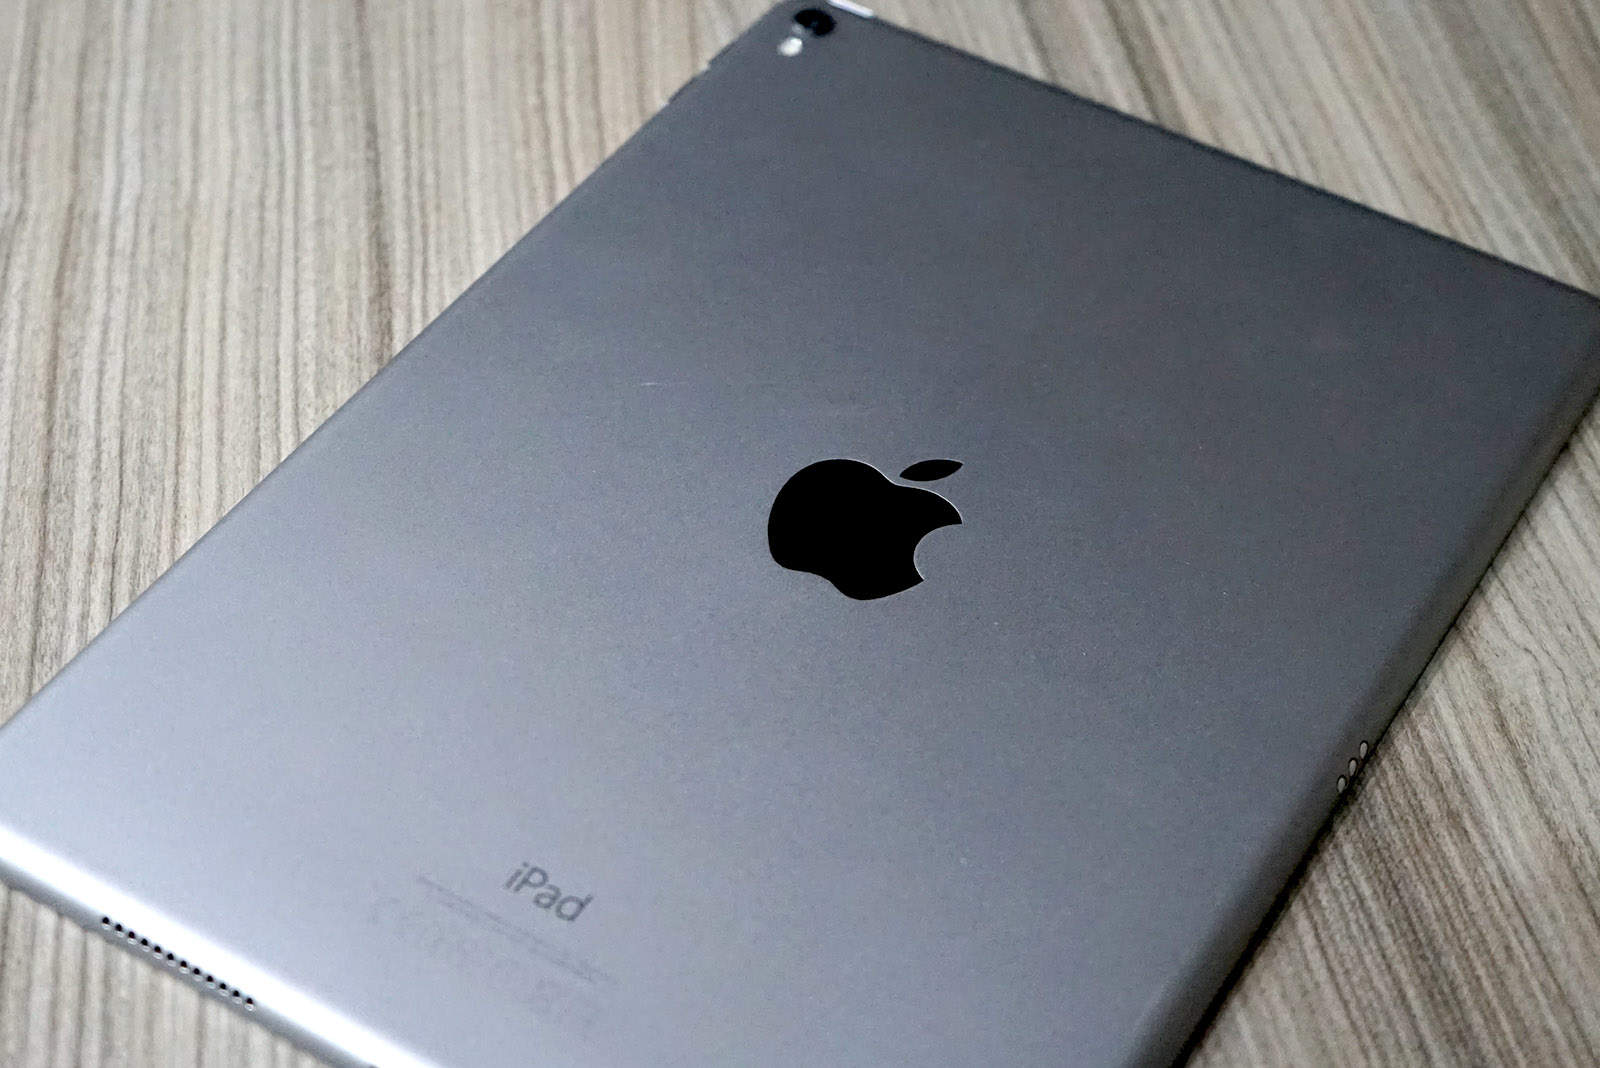 The iPad Pro is about to get even bigger.